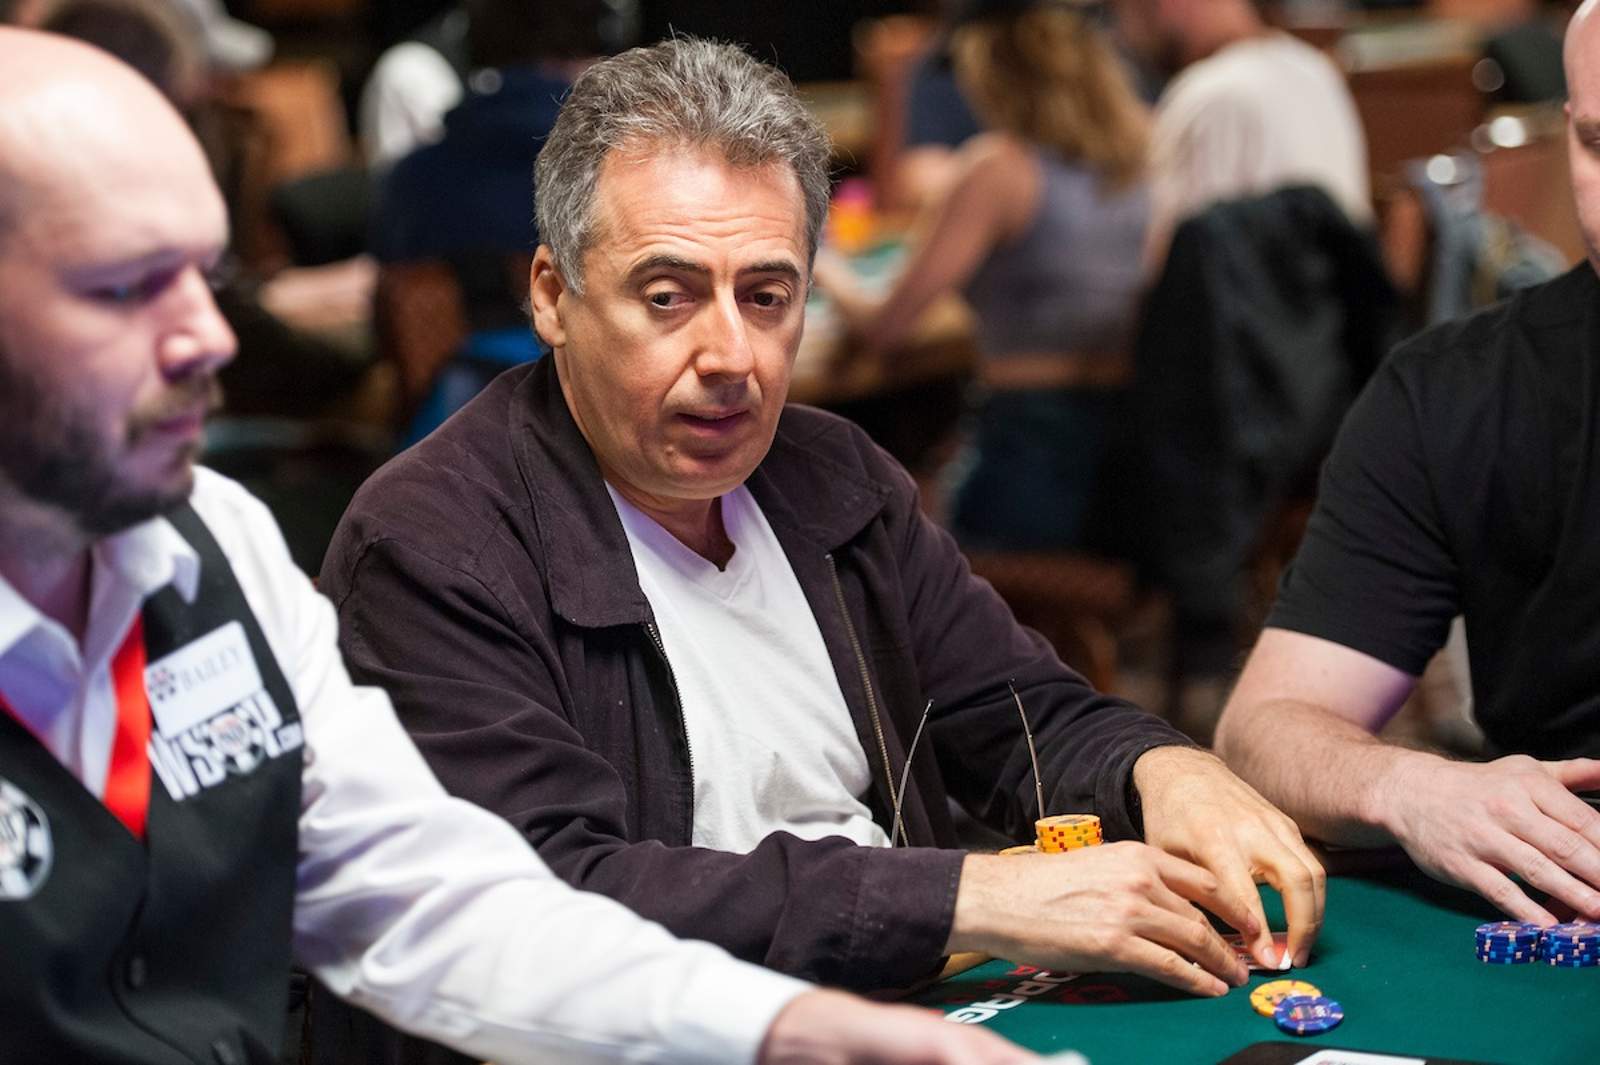 Ralph Perry Leads Milly Maker, 14 Players Return for Final Day